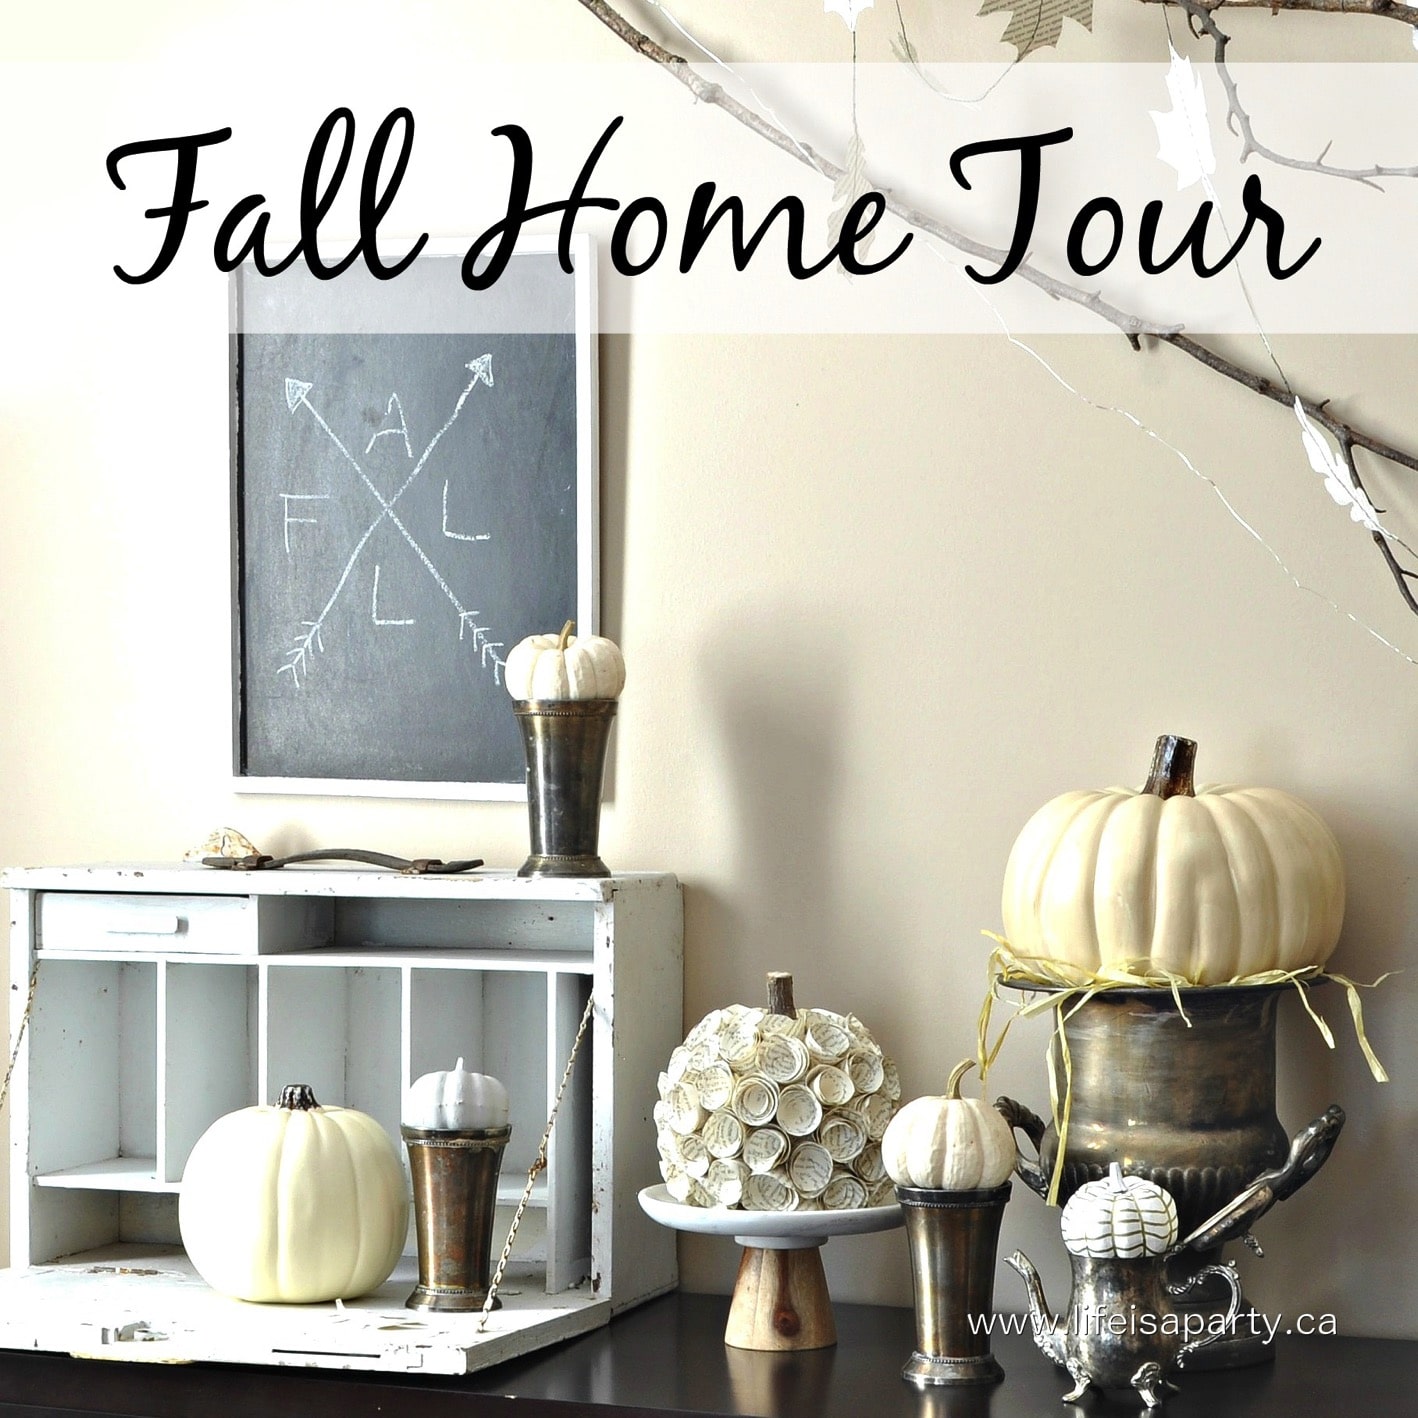 Netural Fall Home Tour: full of neutral fall decor like white pumpkins, birch logs, cozy knits, and candles bring fall in whites and creams.